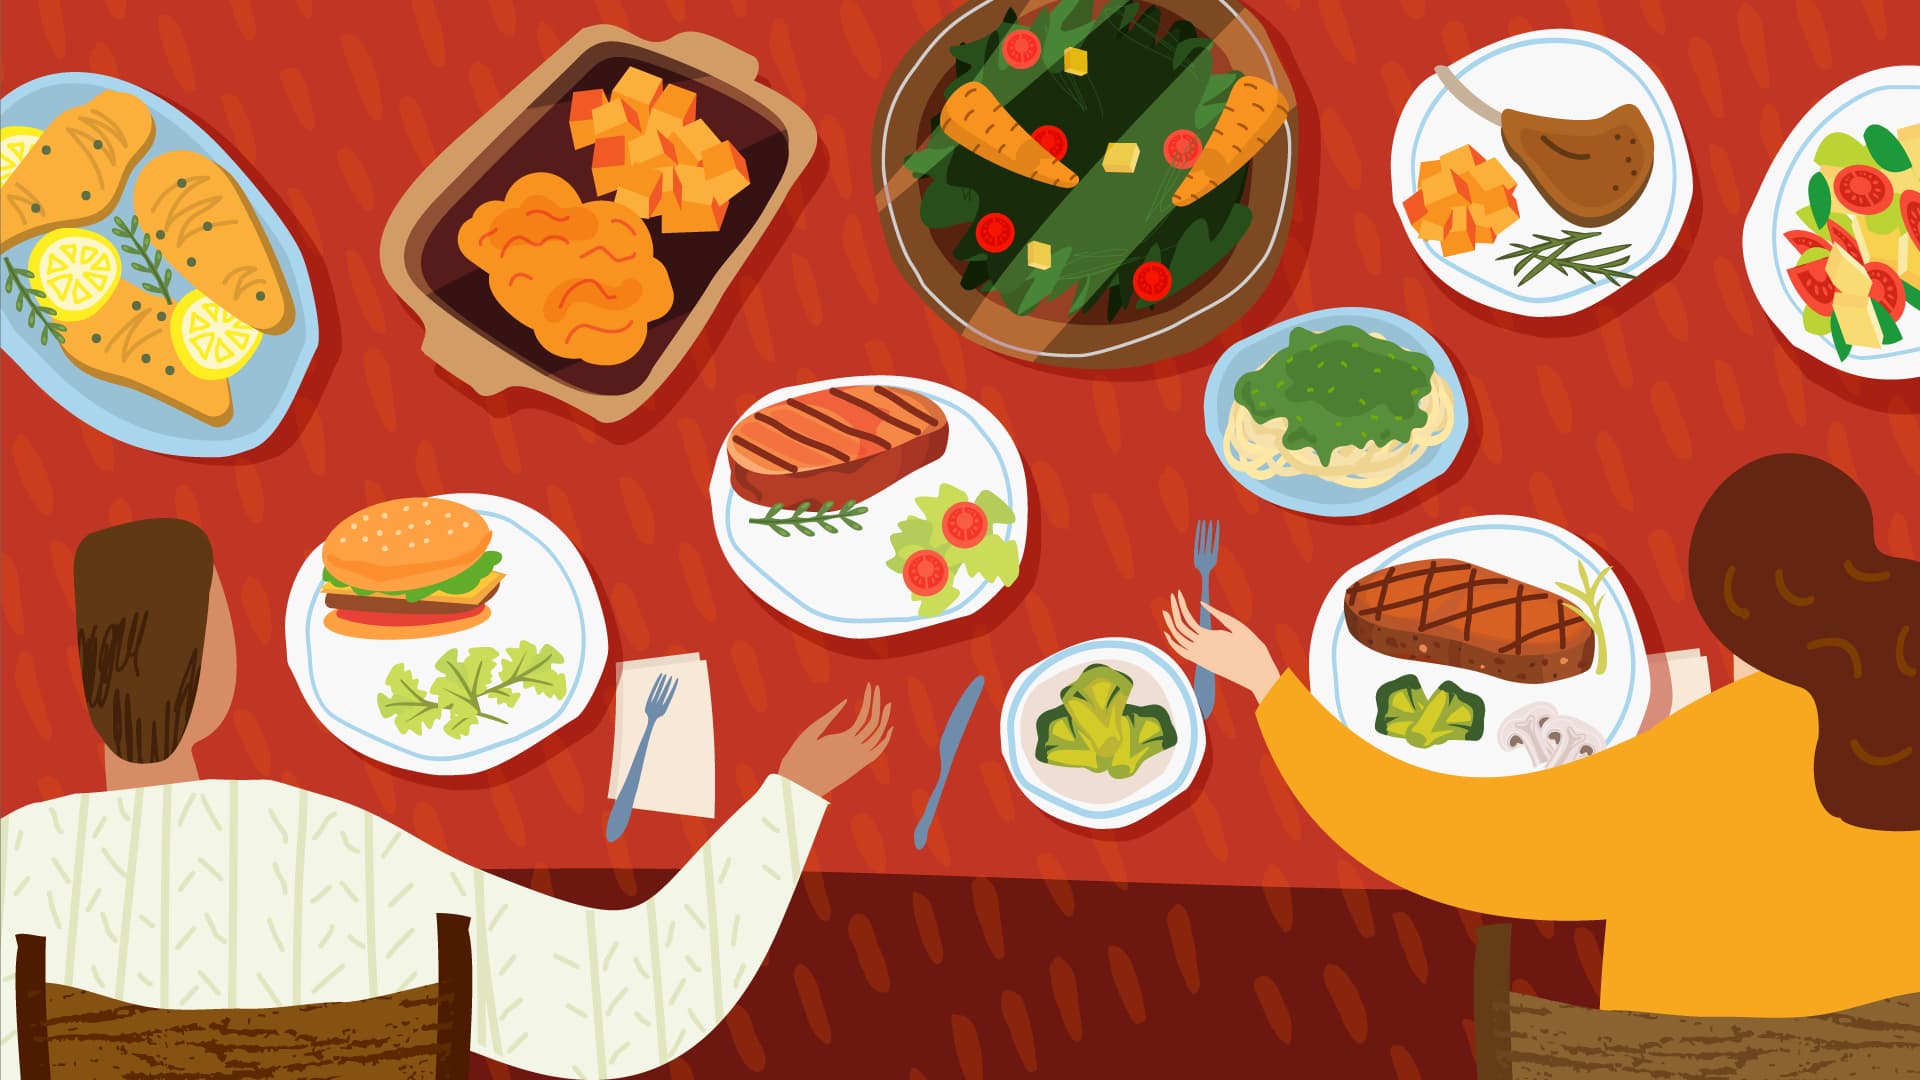 Illustration of a holiday feast